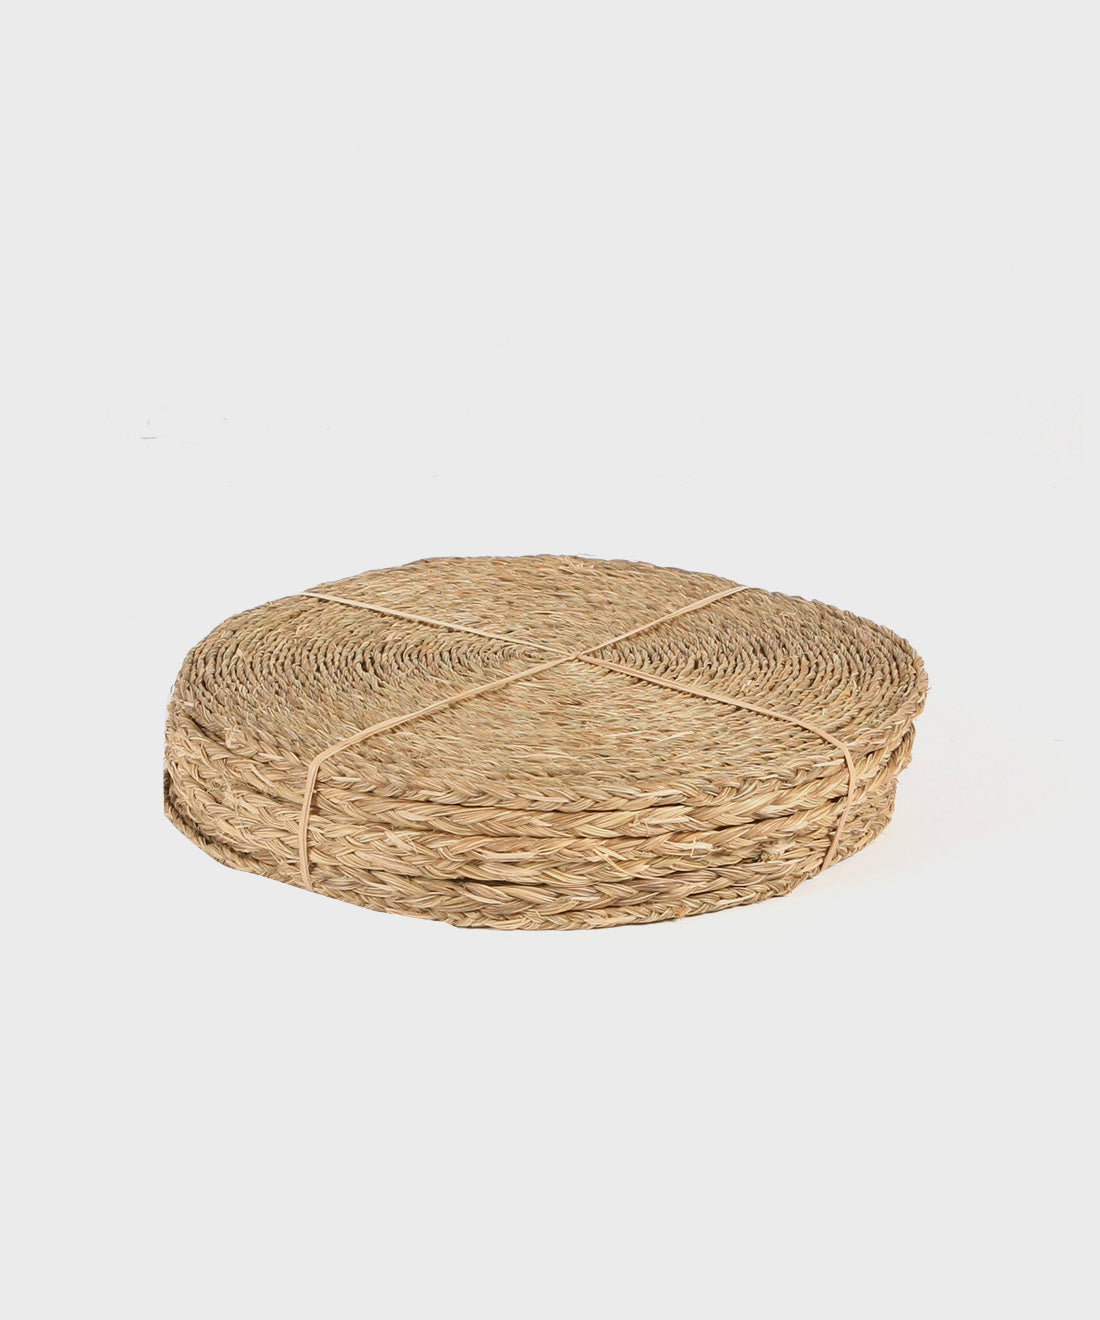 Woven Grass Round Placemats, Set of 6